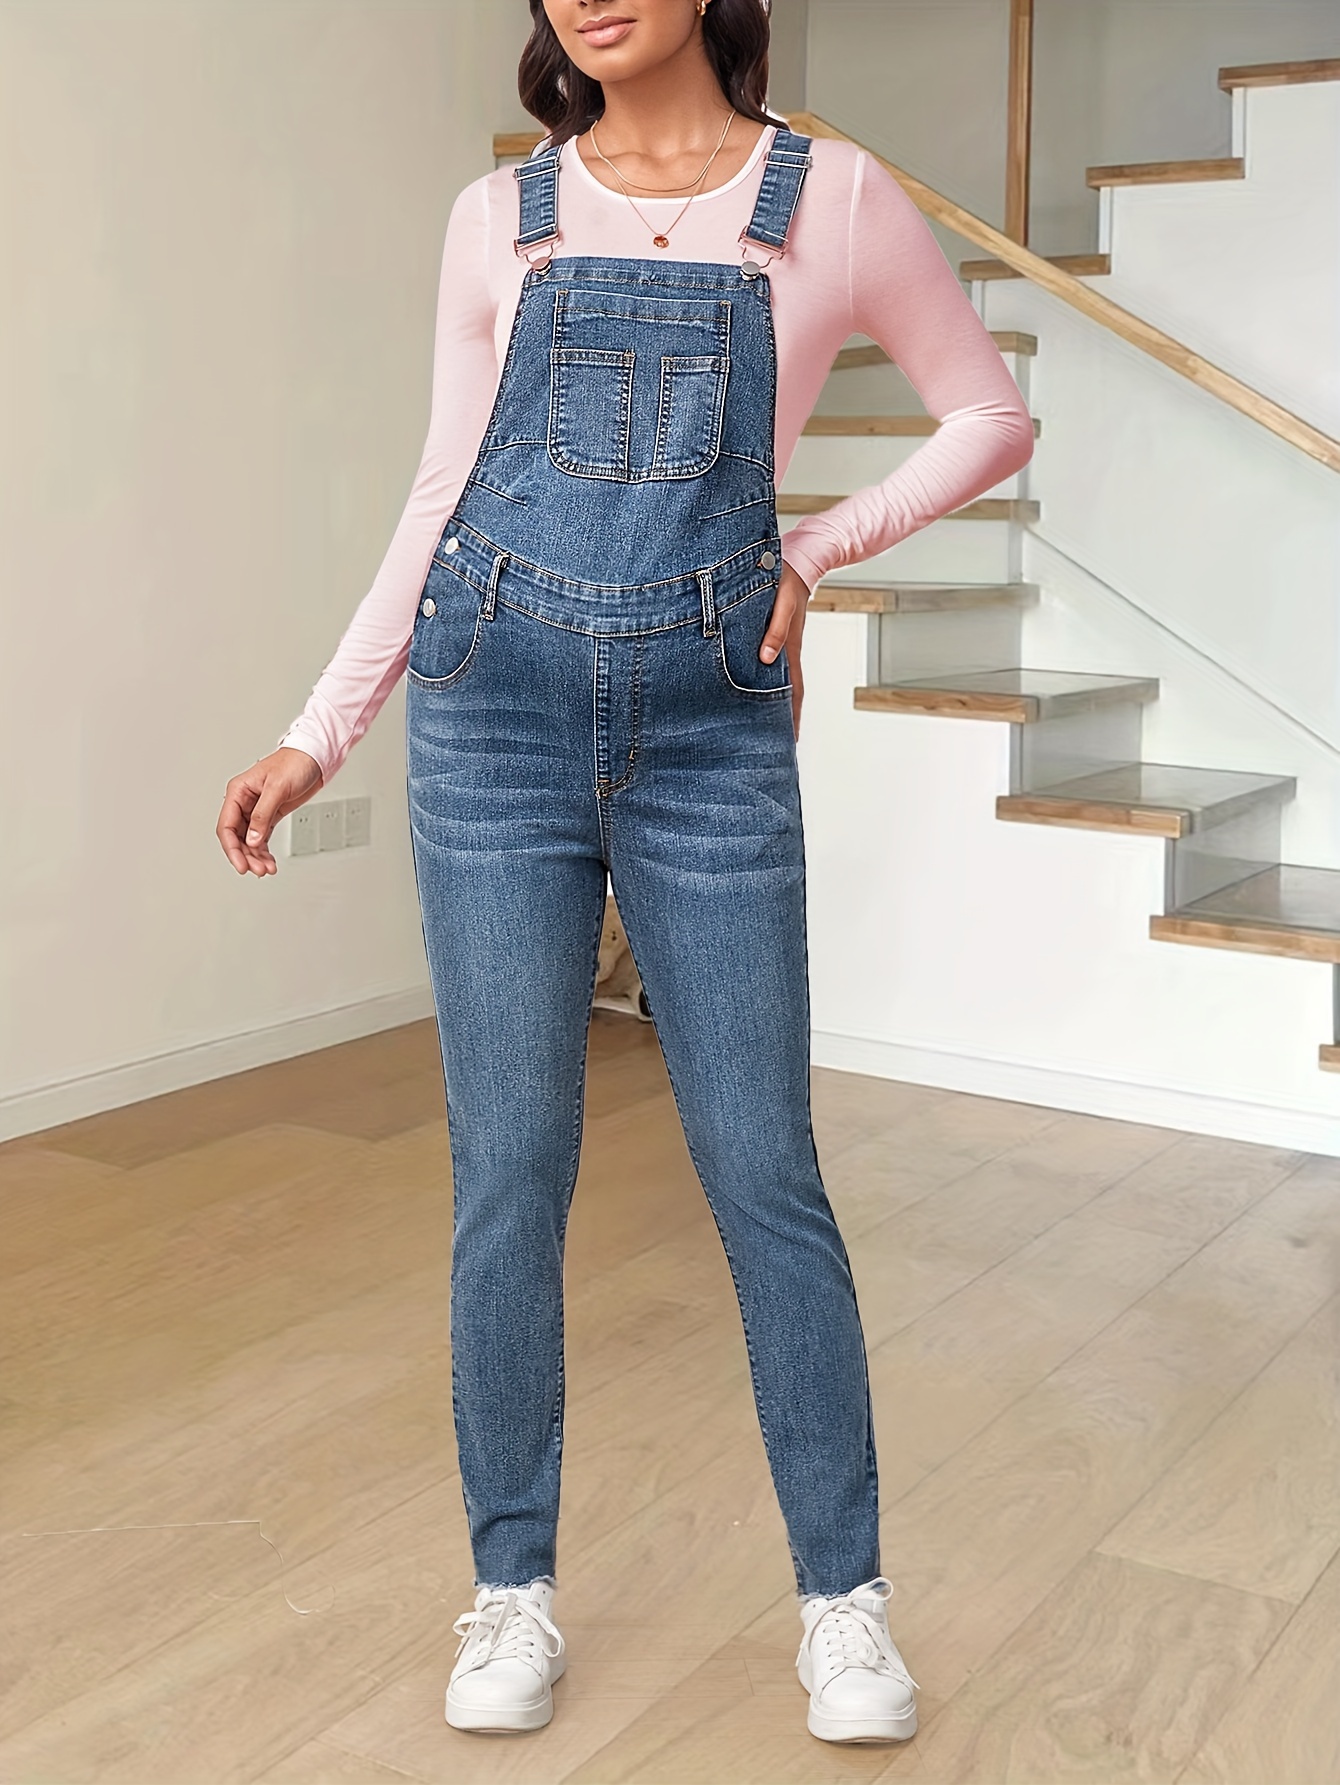 Women's Maternity Solid Denim Overalls, Fashion Casual Jeans For Fall  Winter, Pregnant Women's Clothing